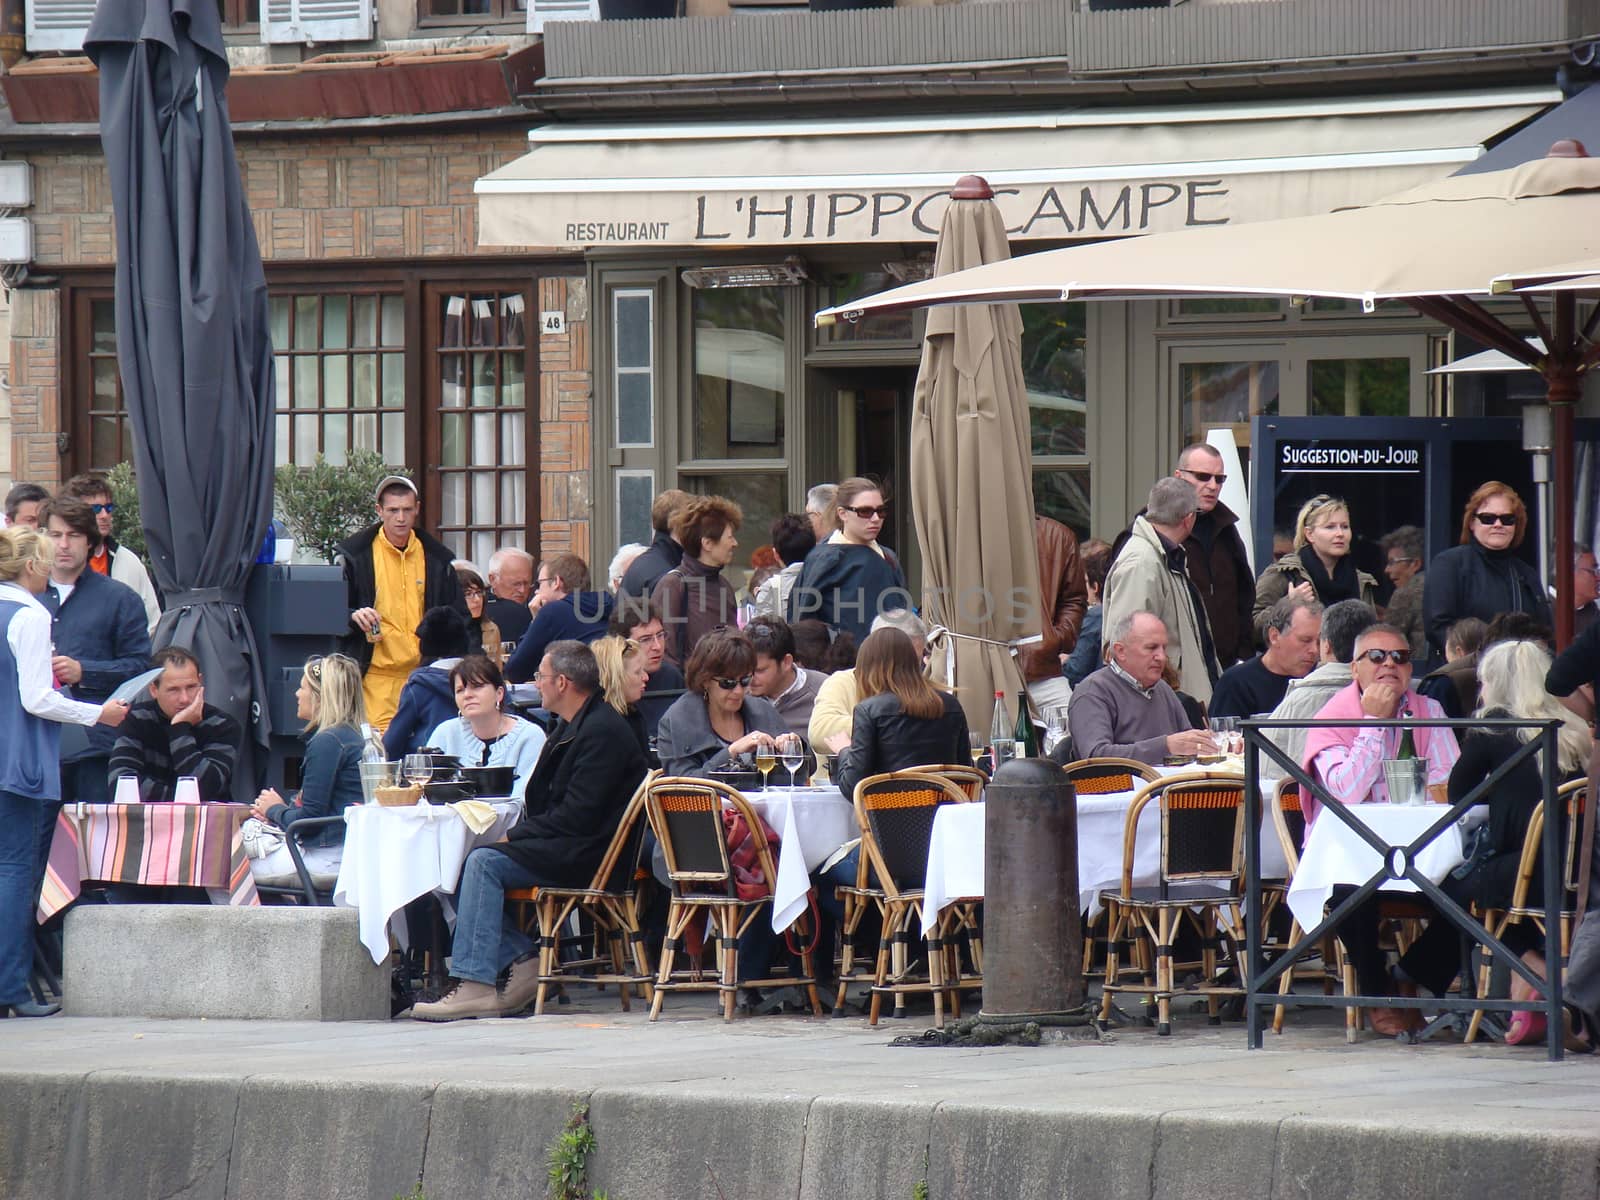 People Sitting on the Terrace of the Restaurant in France by bensib